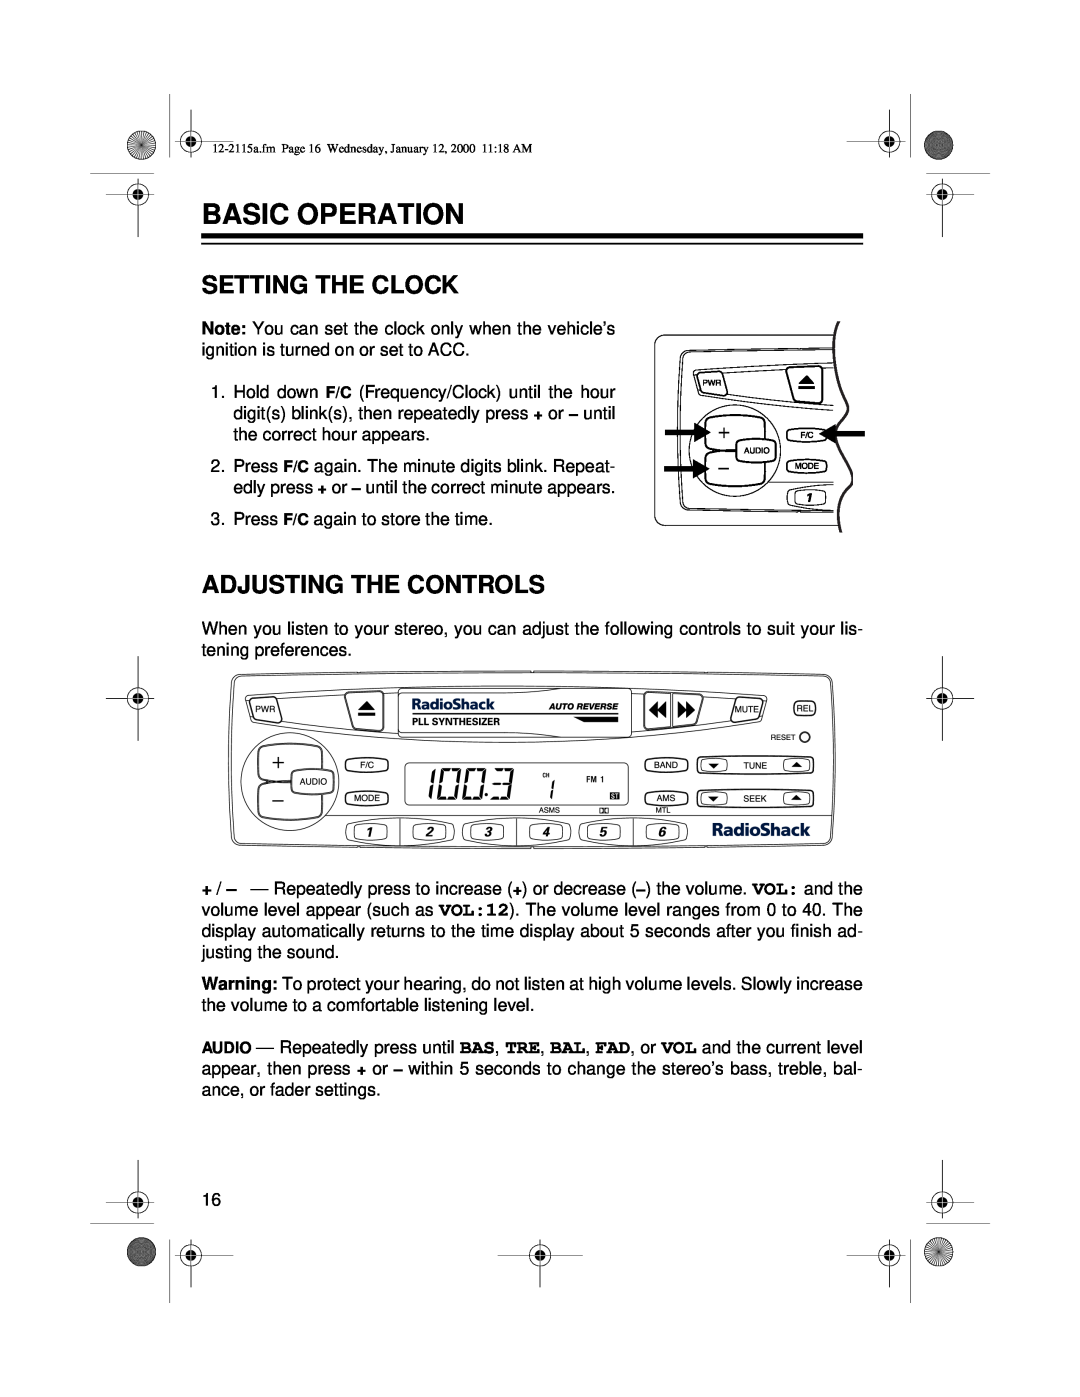 Radio Shack AM/FM Stereo Cassette owner manual Basic Operation, Setting The Clock, Adjusting The Controls 